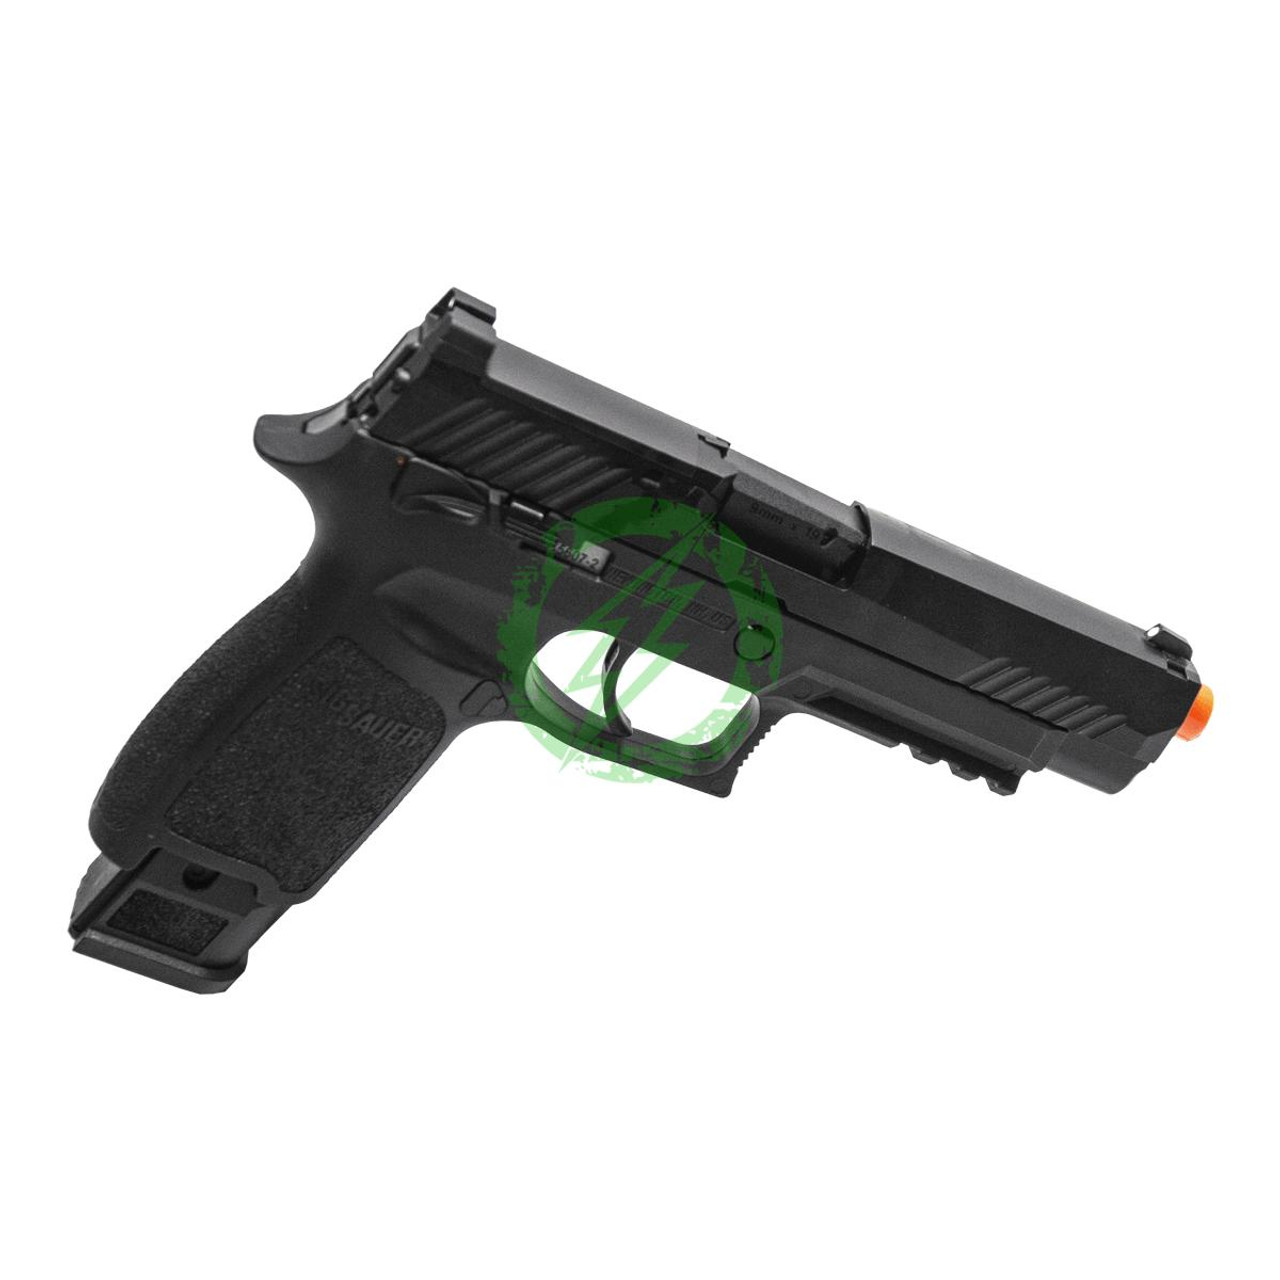  SIG Airsoft PROFORCE P320 M17 GBB Airsoft Pistol | CO2 